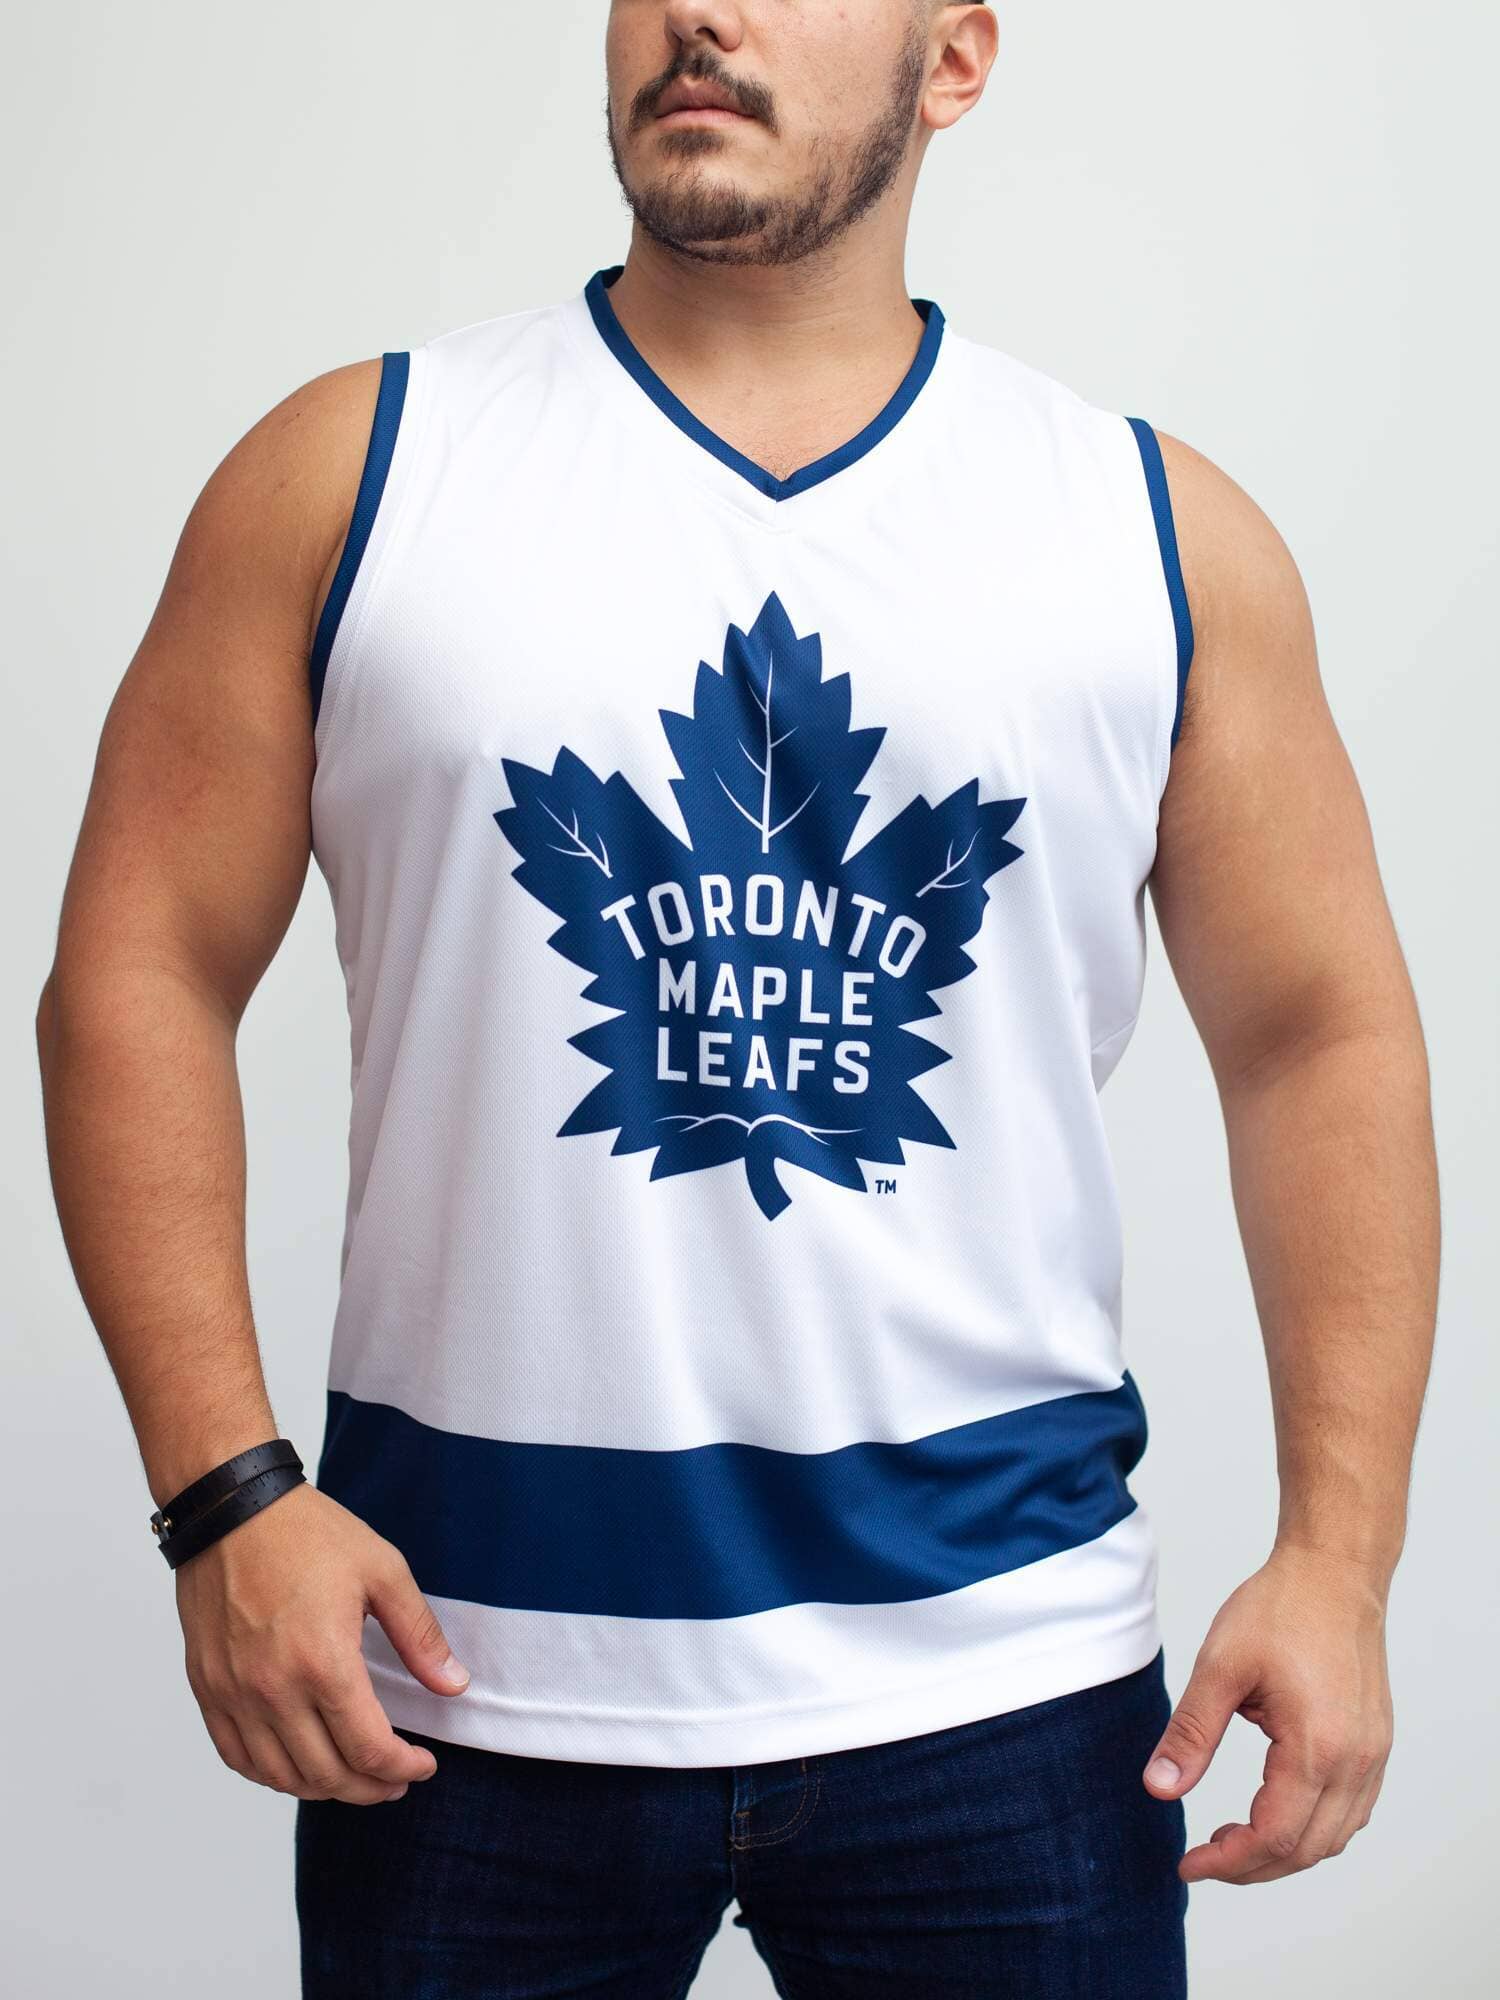 Sold Out! 'FRONTO LEAFS' HOCKEY JERSEY